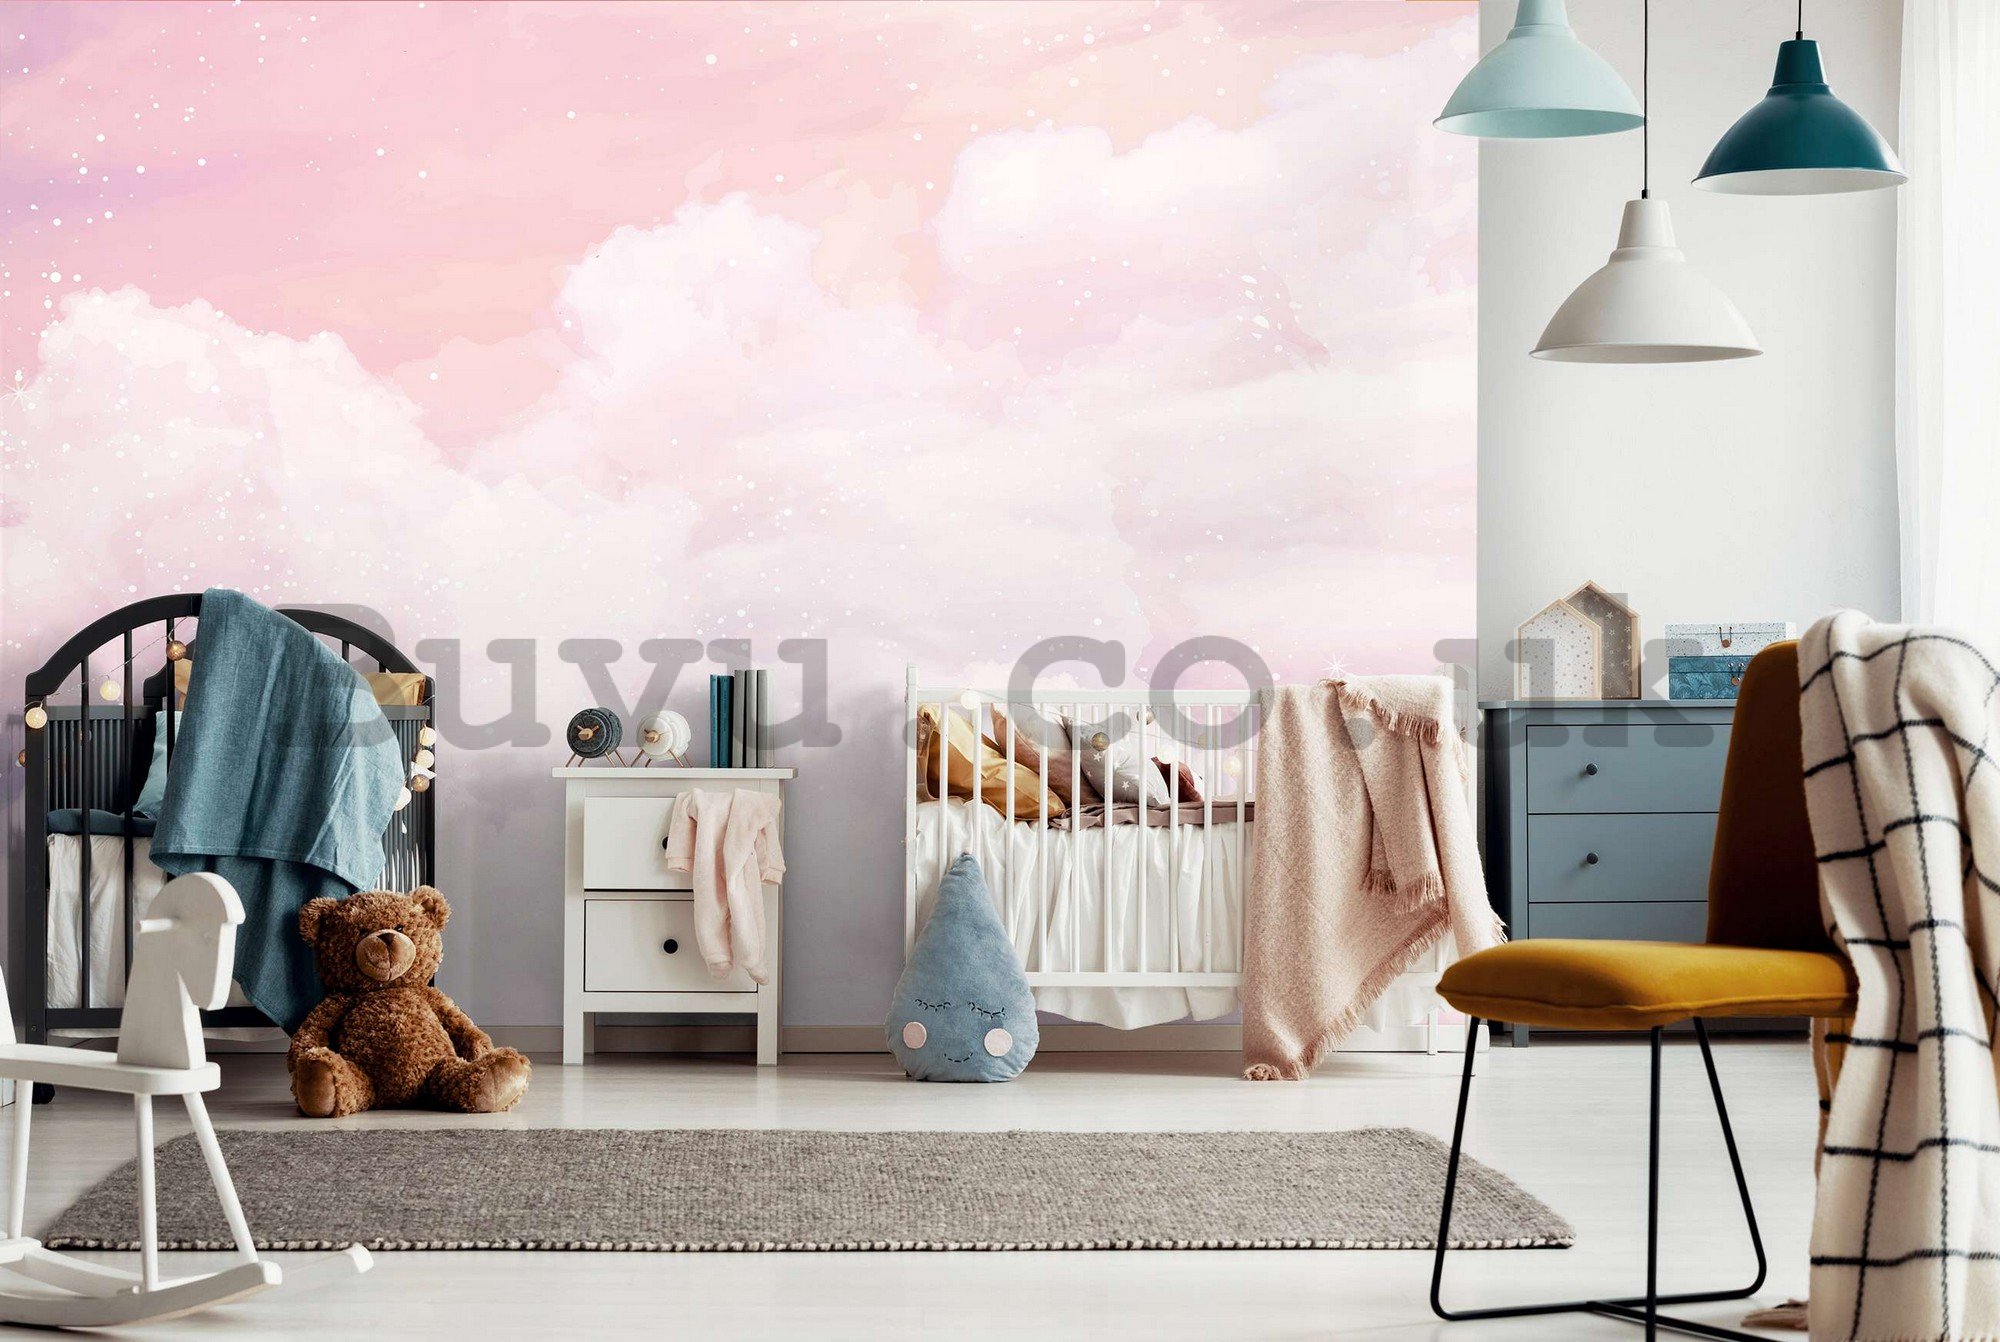 Wall mural vlies: Sky with clouds - 368x254 cm